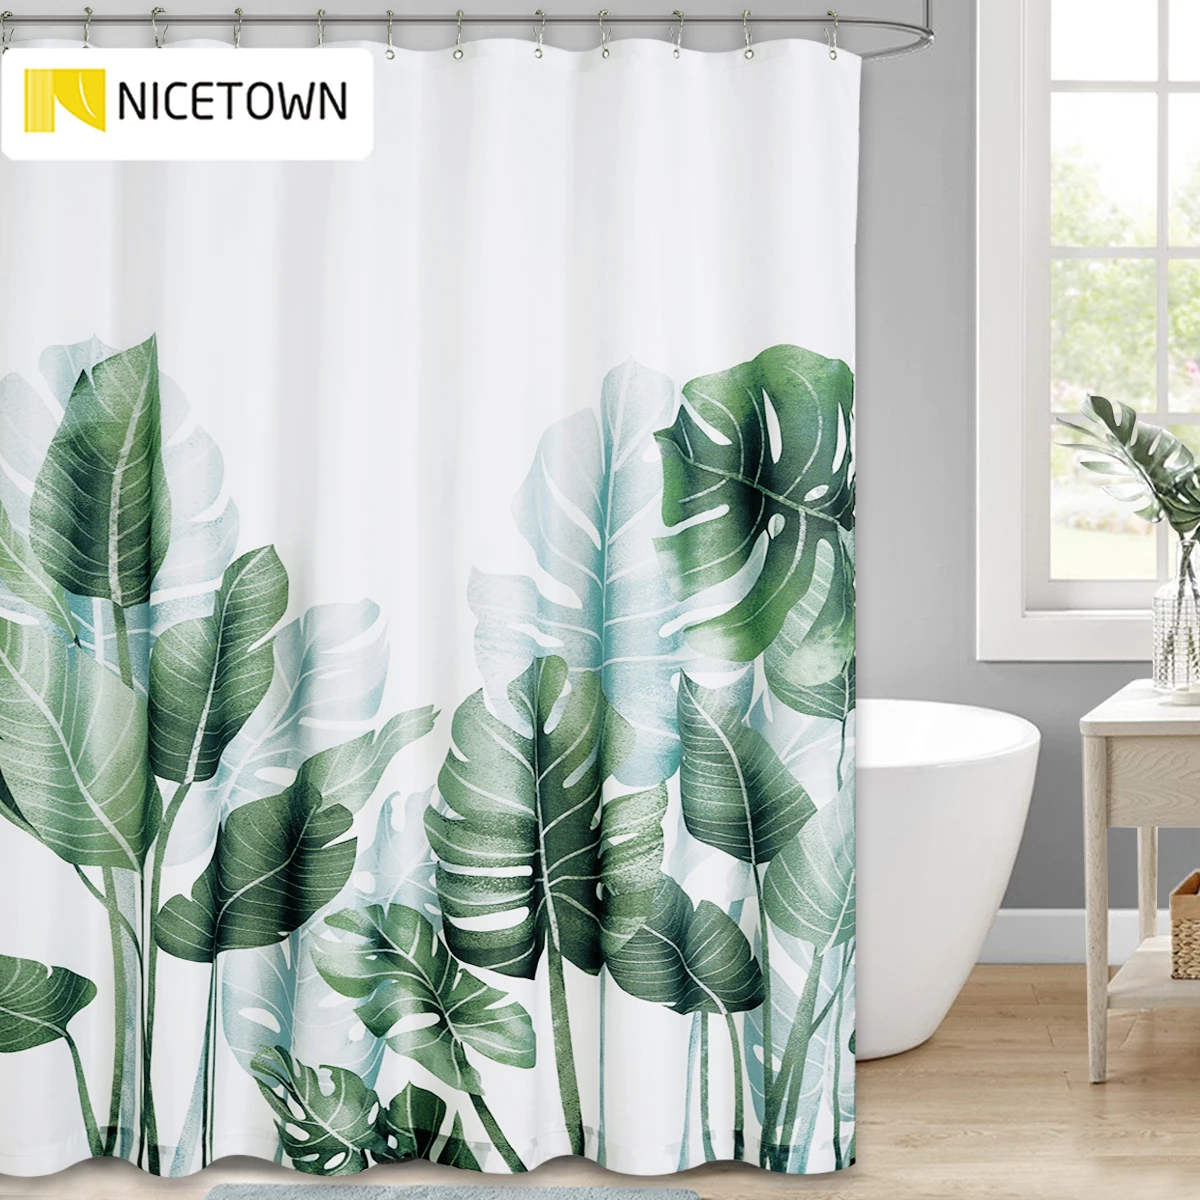 Buy Curtain Bathroom Shower Green Waterproof NICETOWN Plant Polyester for 60-Patterns Leaves 4000827901498